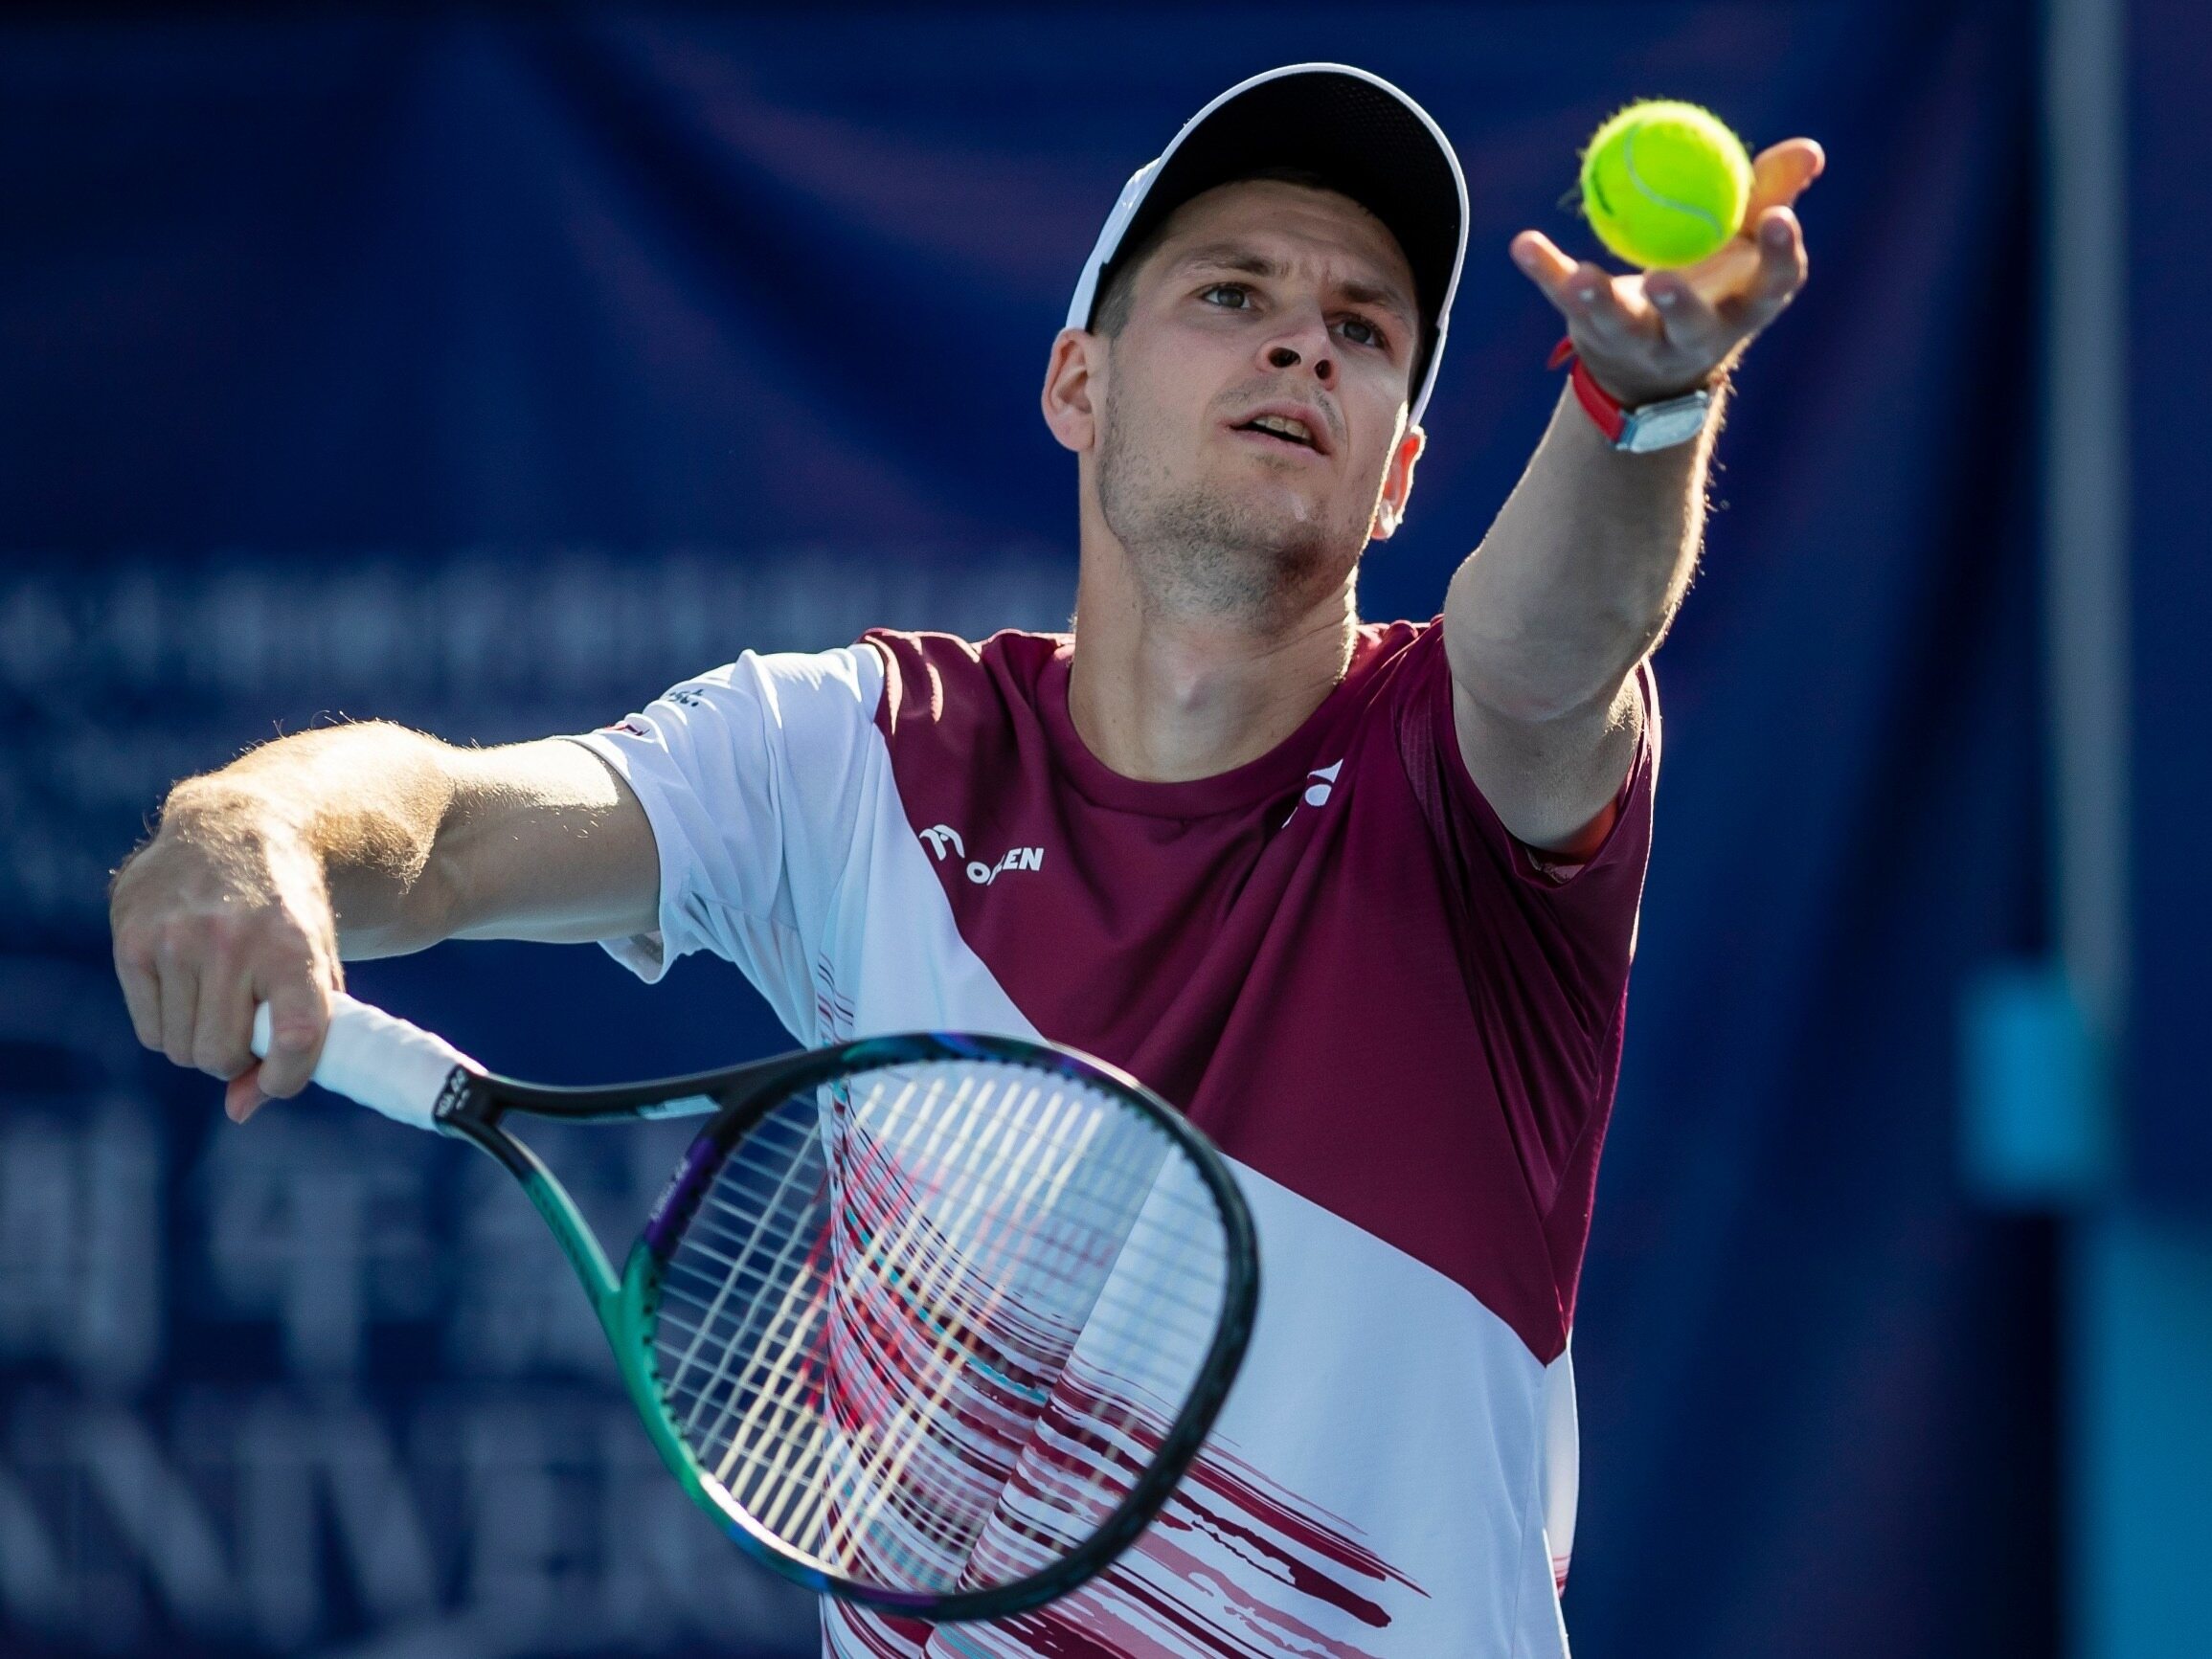 Hubert Hurkacz vs. Miomir Kecmanovic at ATP Toronto.  What time and where can I watch the TV broadcast and online?